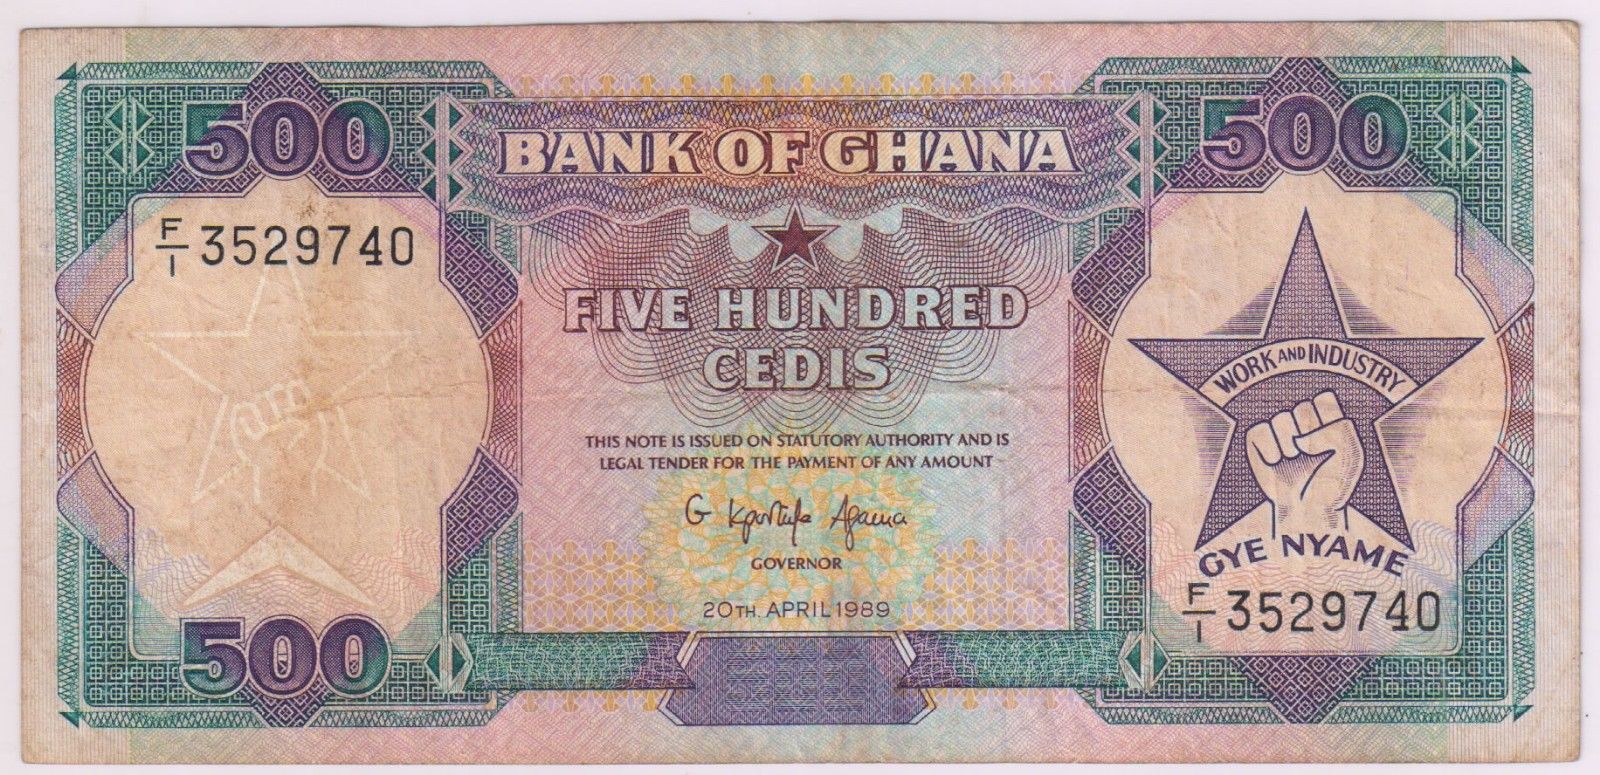 Ghana 500 frs 1989 currency note KB Coins Currencies